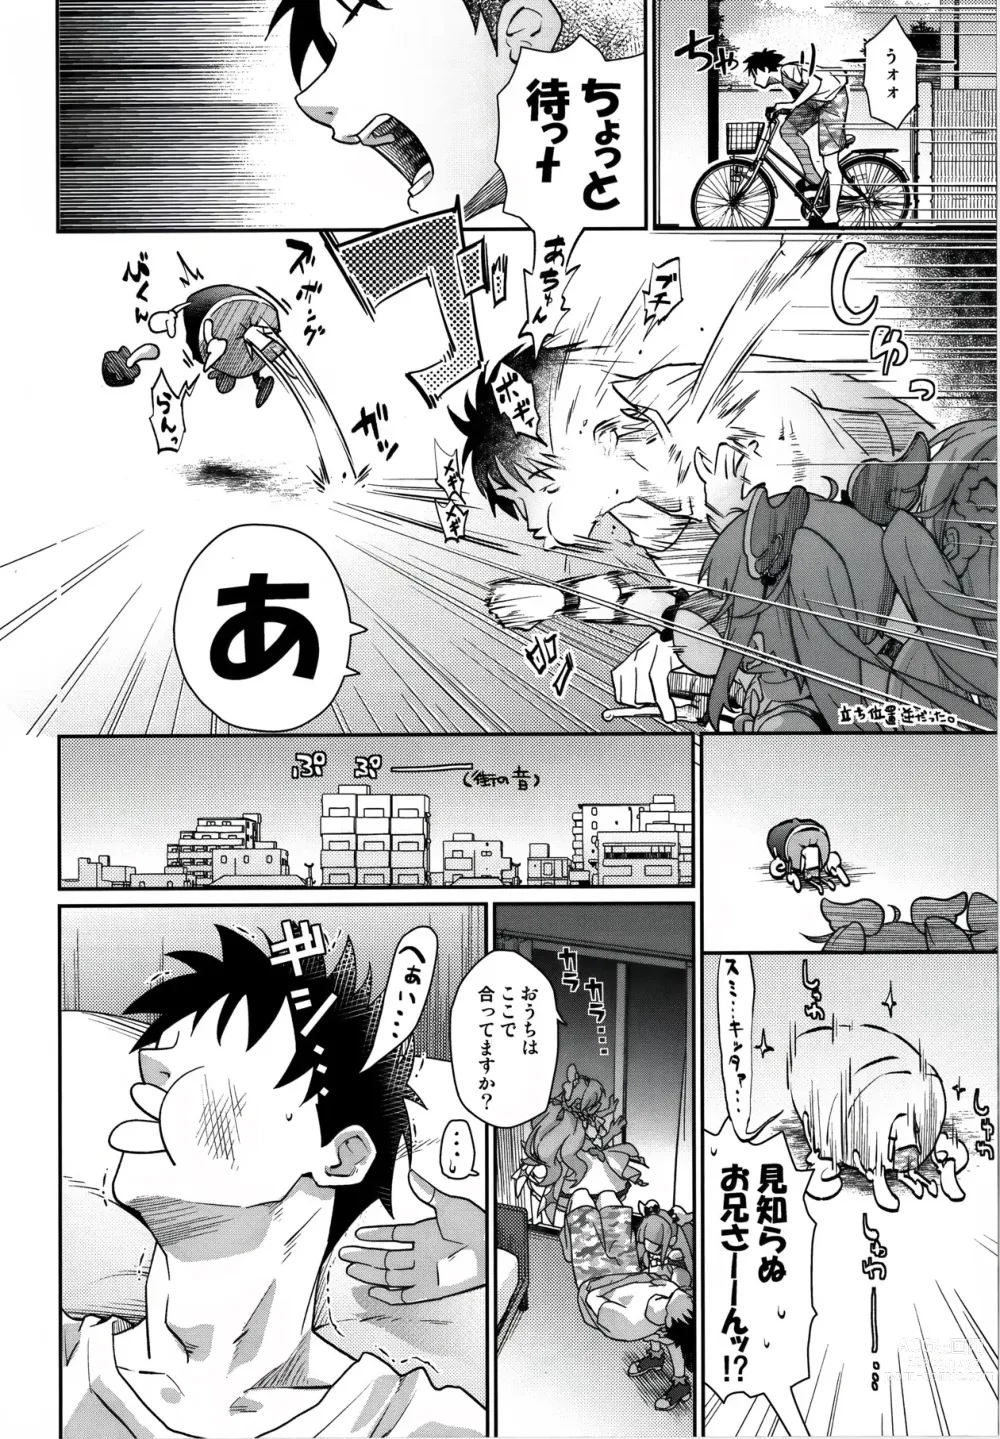 Page 4 of doujinshi Sora-chan IS THE LIMIT